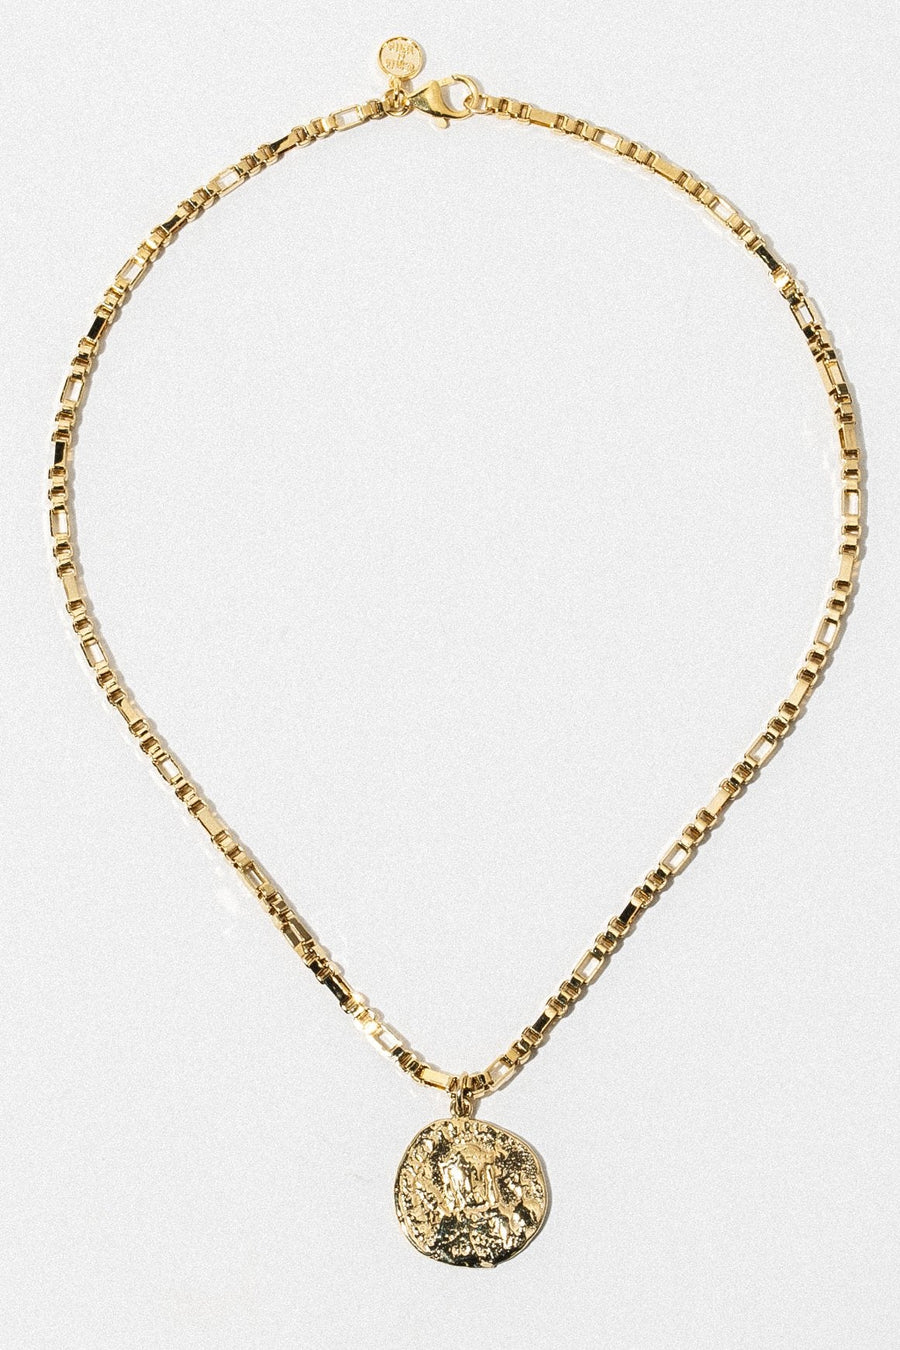 Goddess Jewelry Gold / 16 Inches Yvonne Necklace